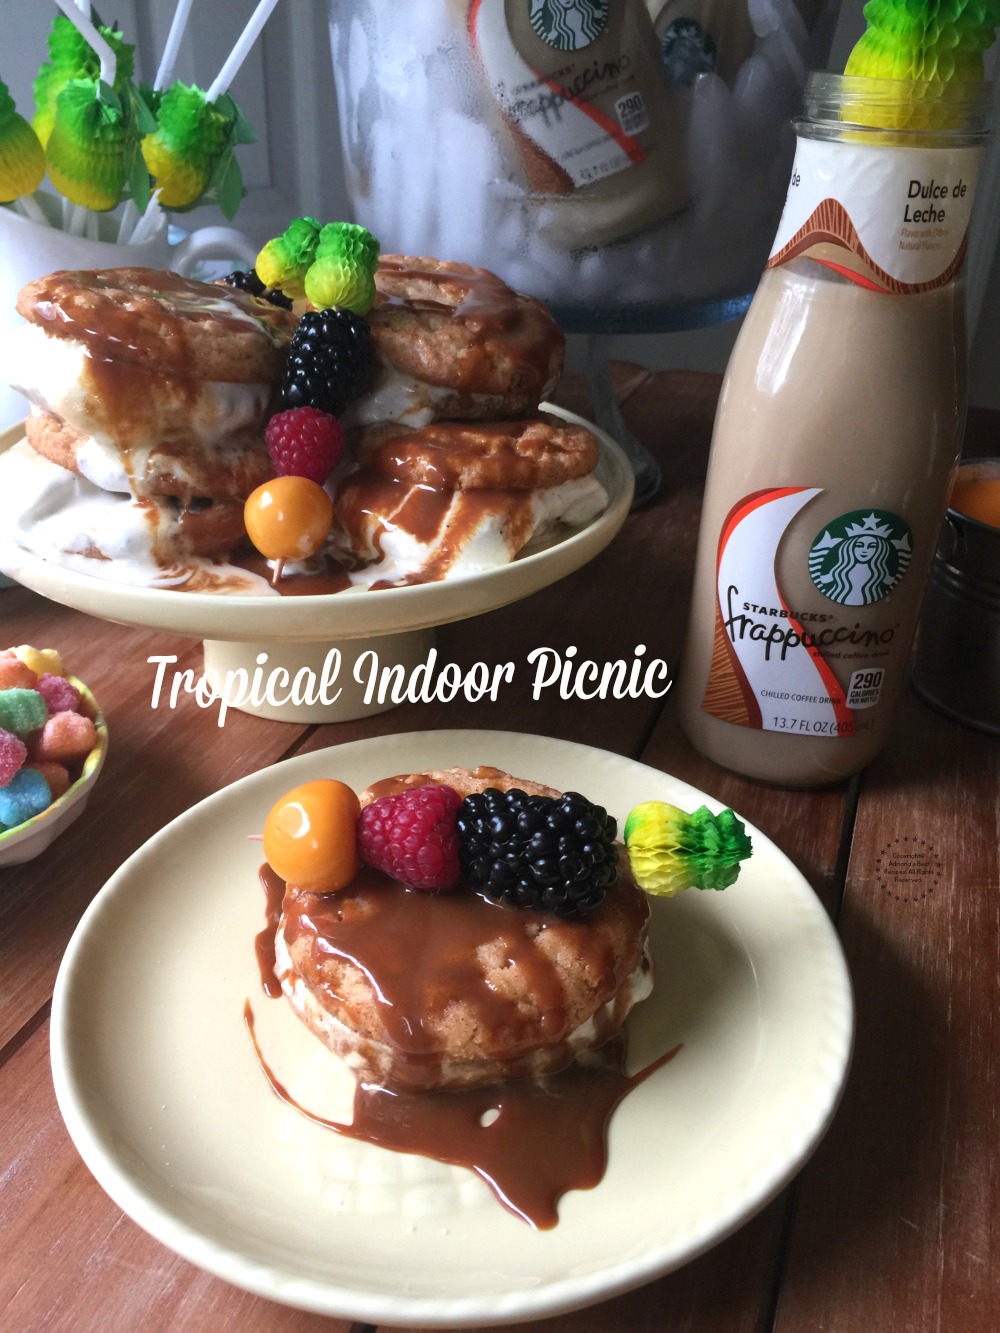 Throwing a tropical indoor picnic with las amigas to enjoy a good chatter and spend time together while sipping yummy Frappuccino and eating sweet treats